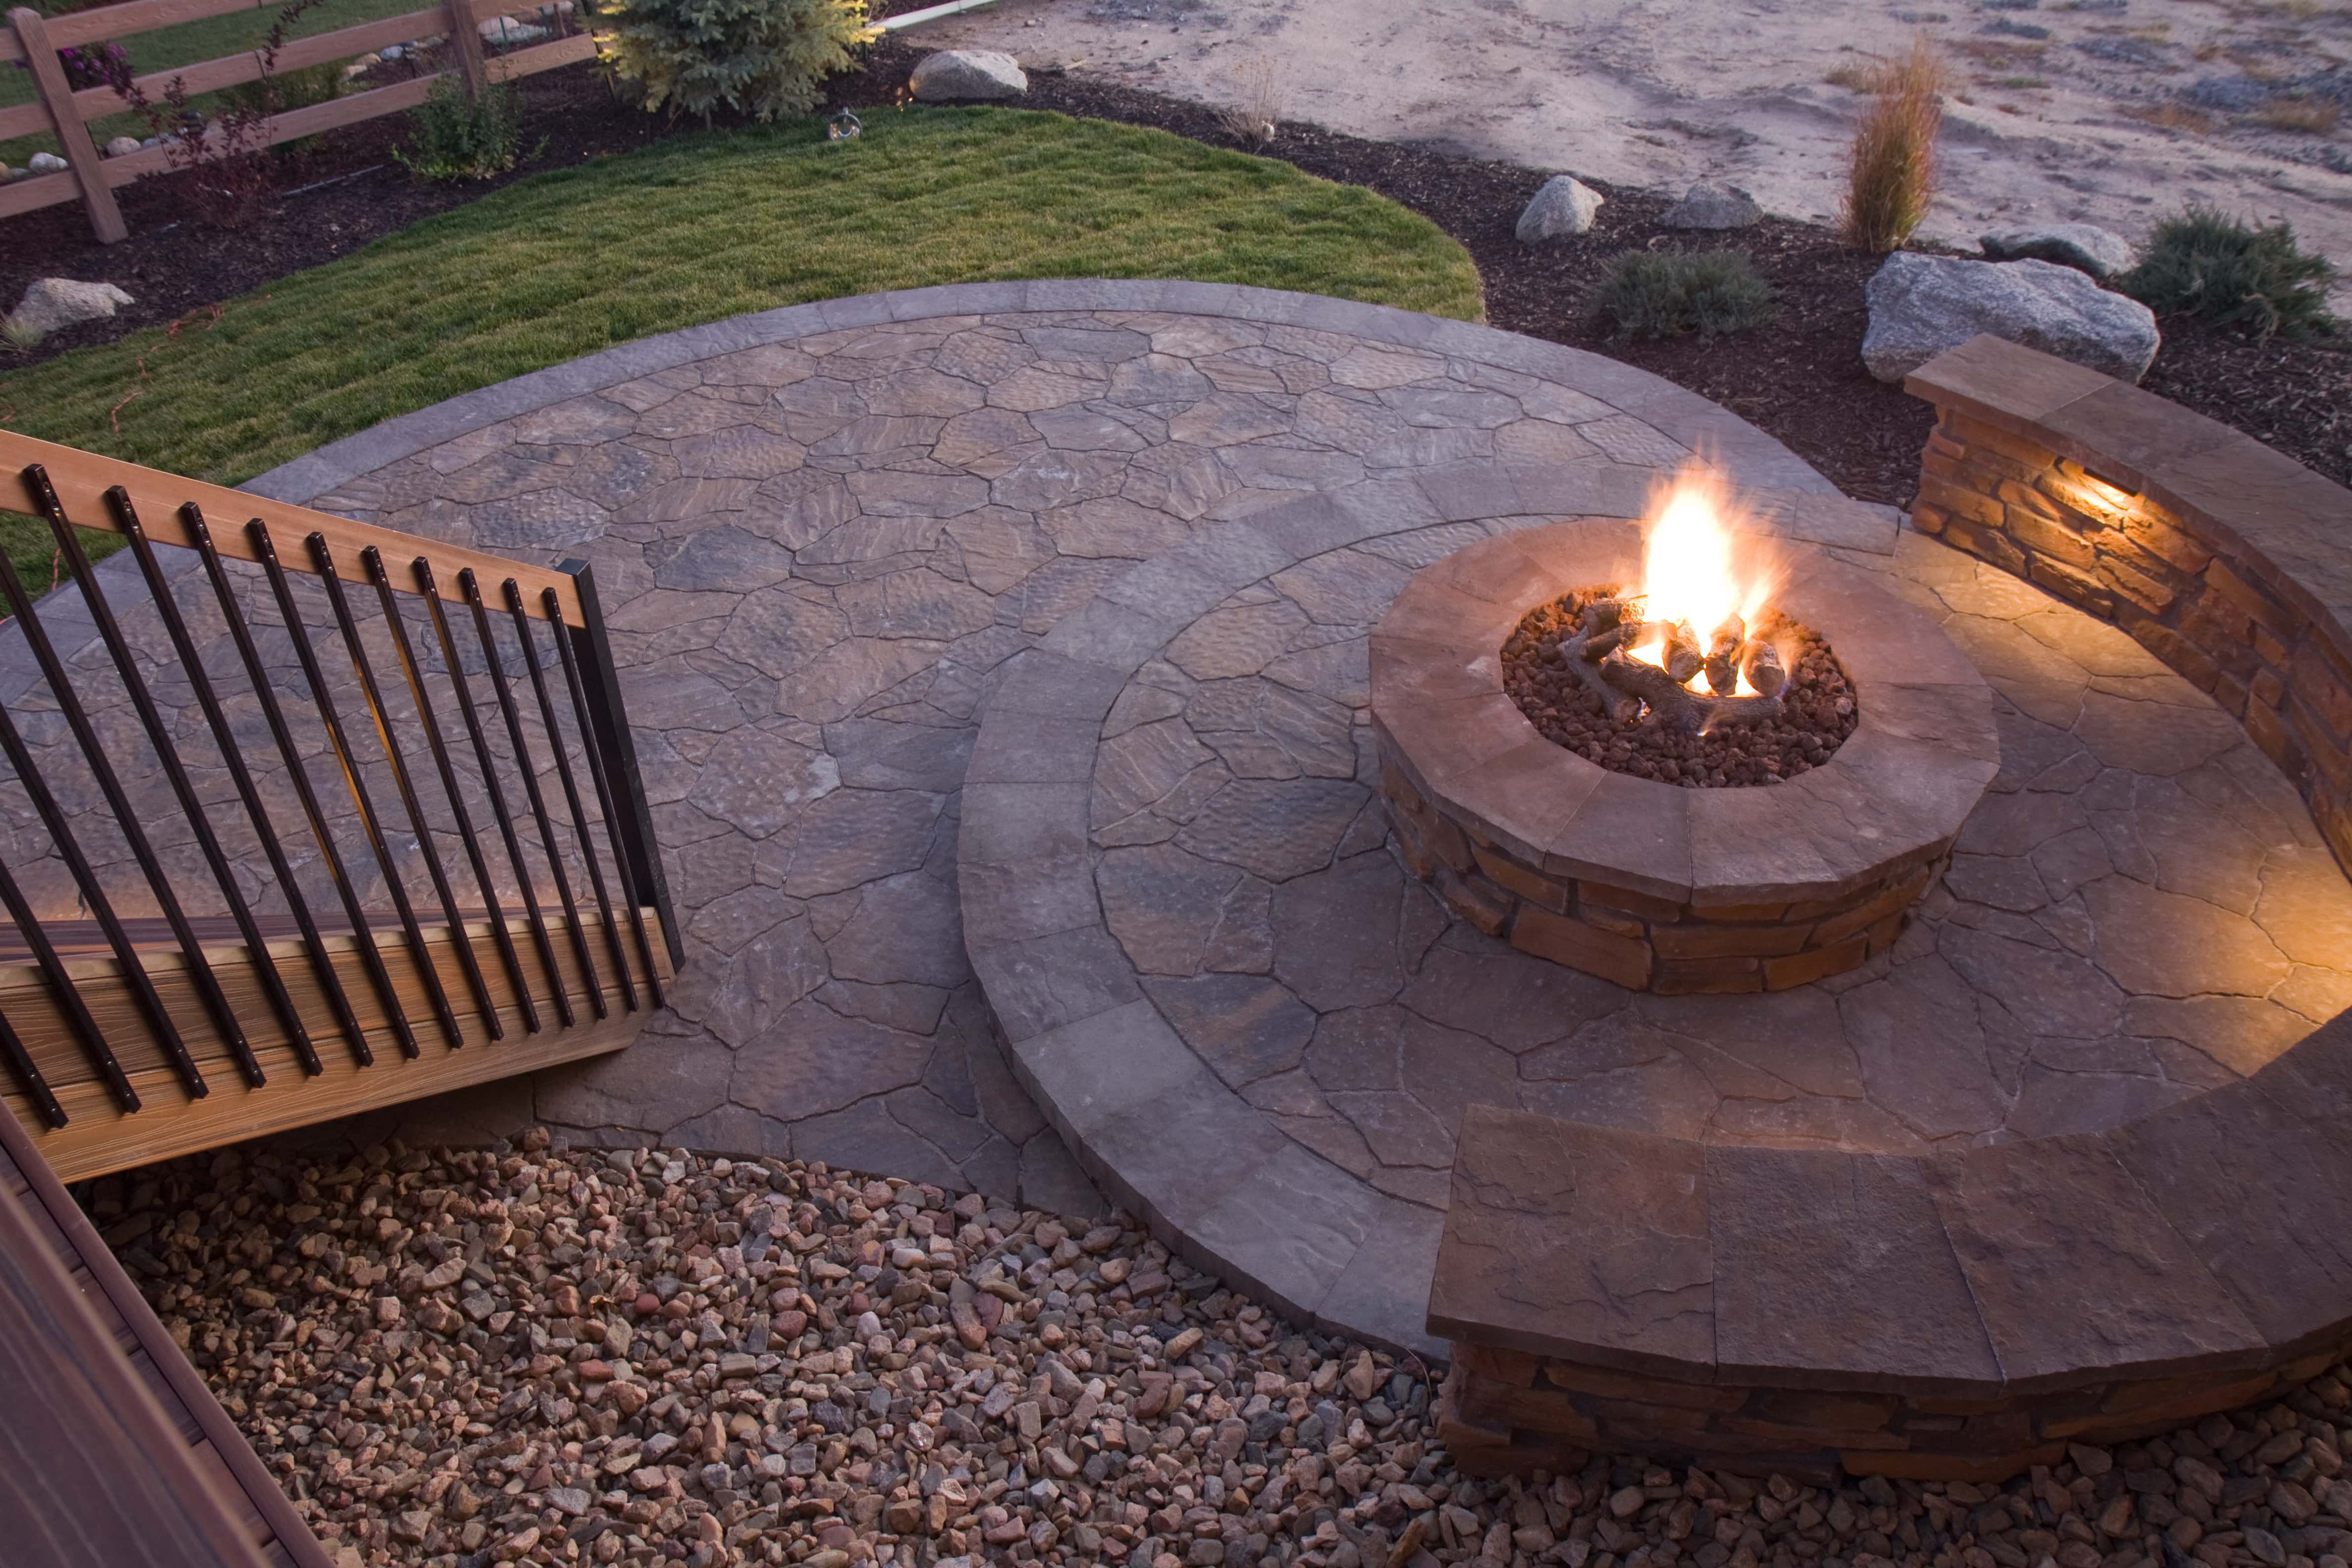 Explore the best firepit ideas for large and small yards. Get inspired and make the most of your outdoor living area. Contact us for expert advice and installation!